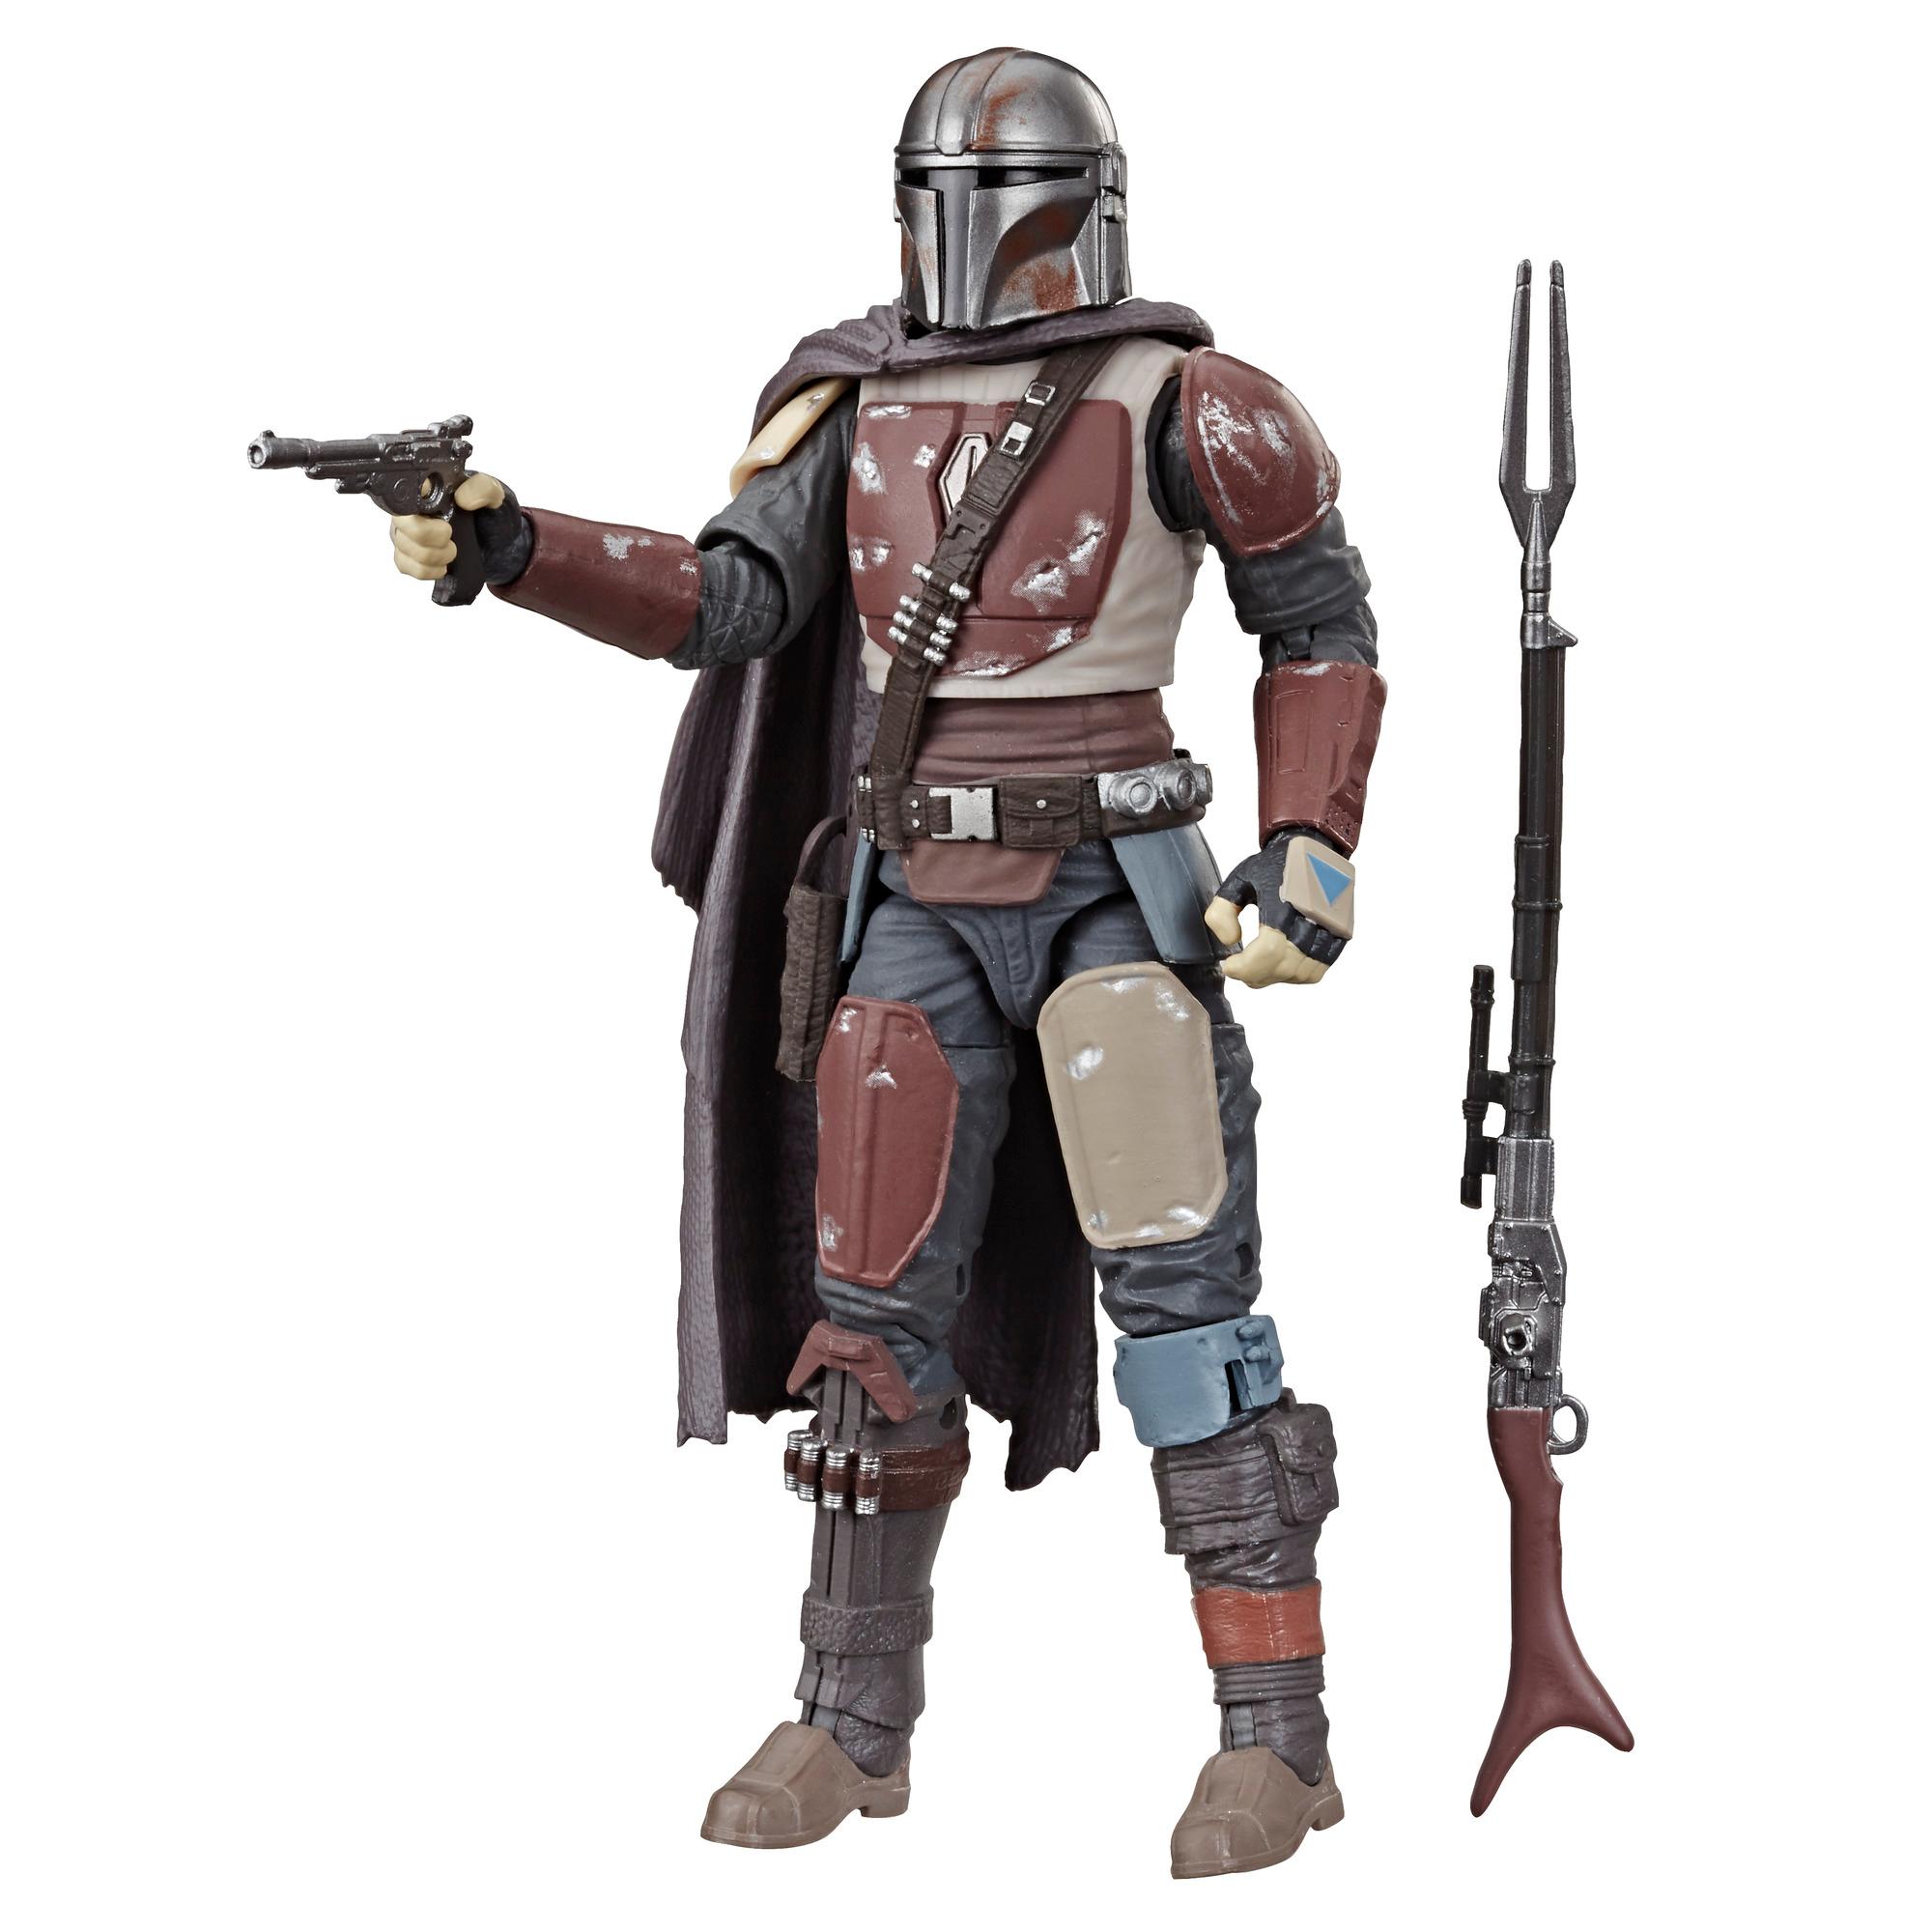 Star Wars The Black Series The Mandalorian Toy 6-inch Scale 